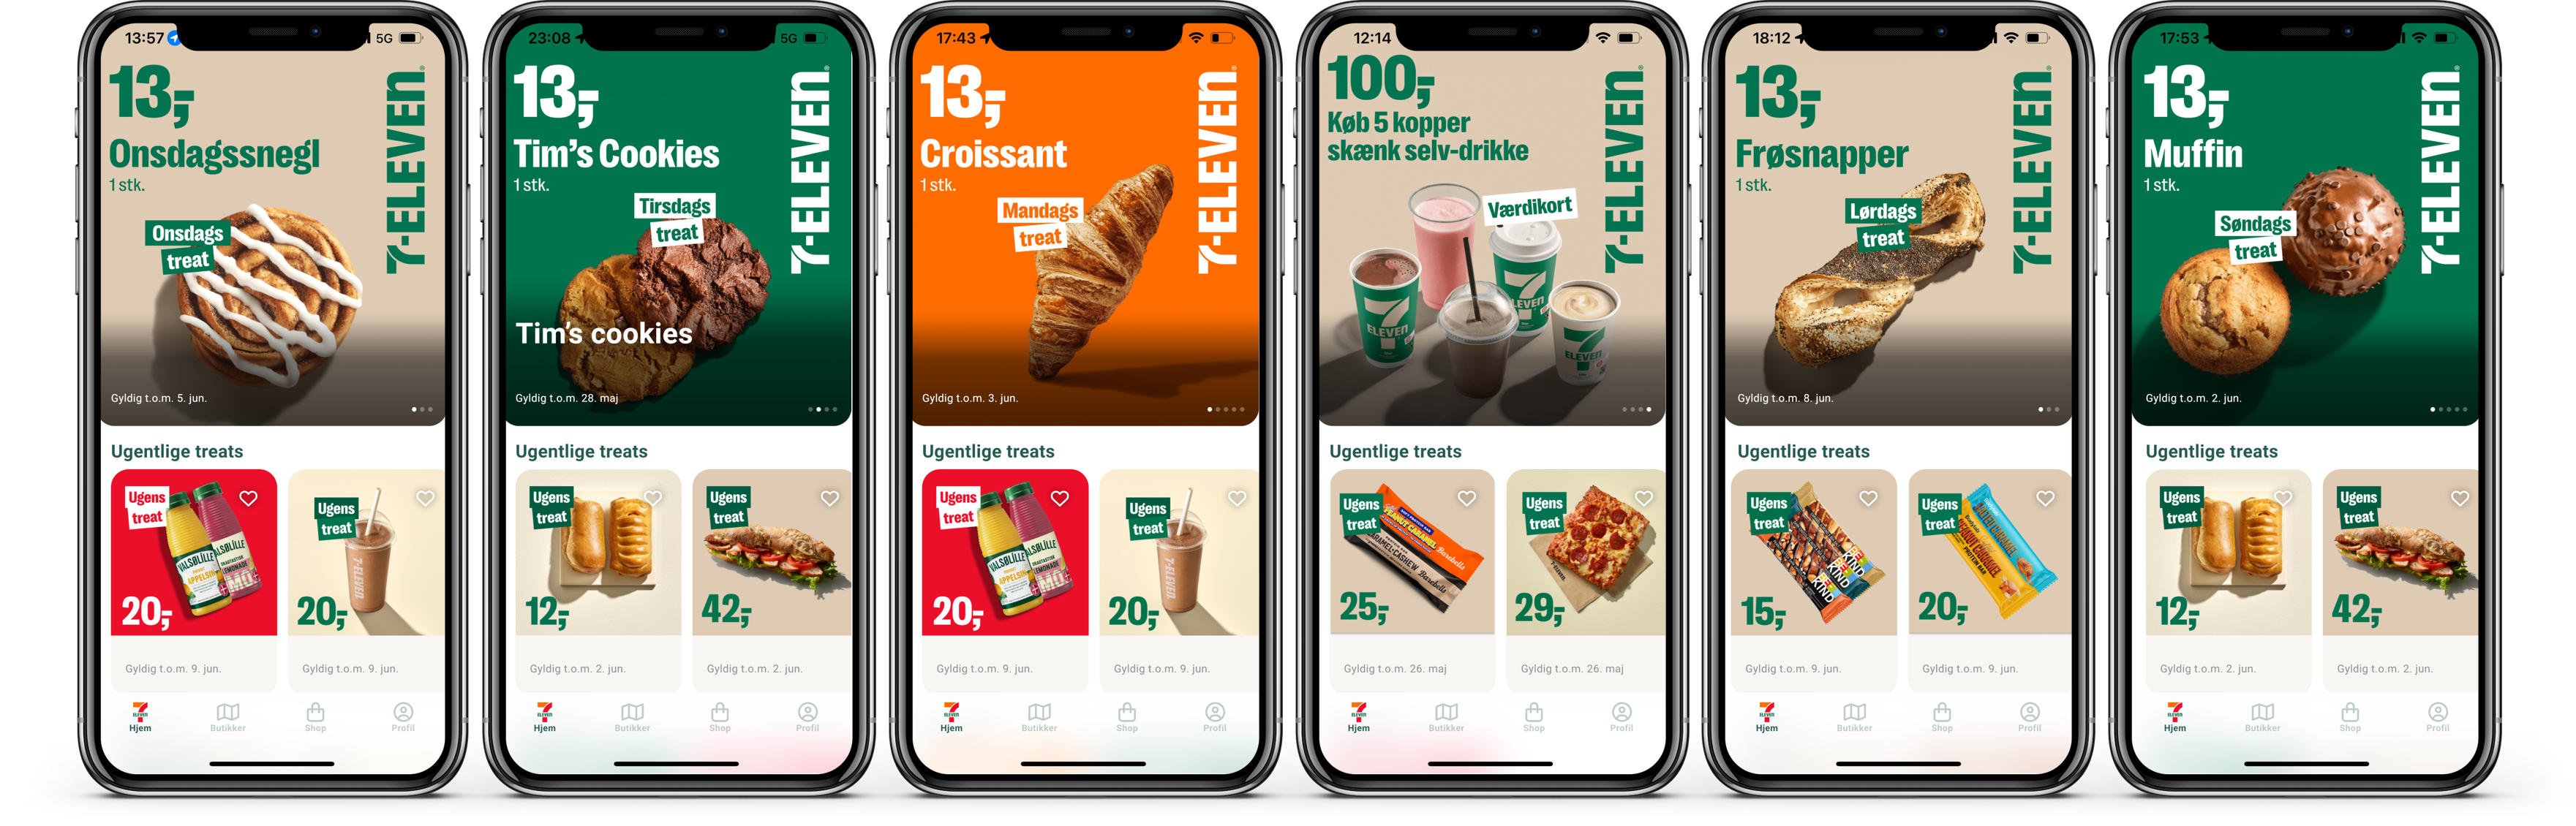 7-Eleven Denmark coupons